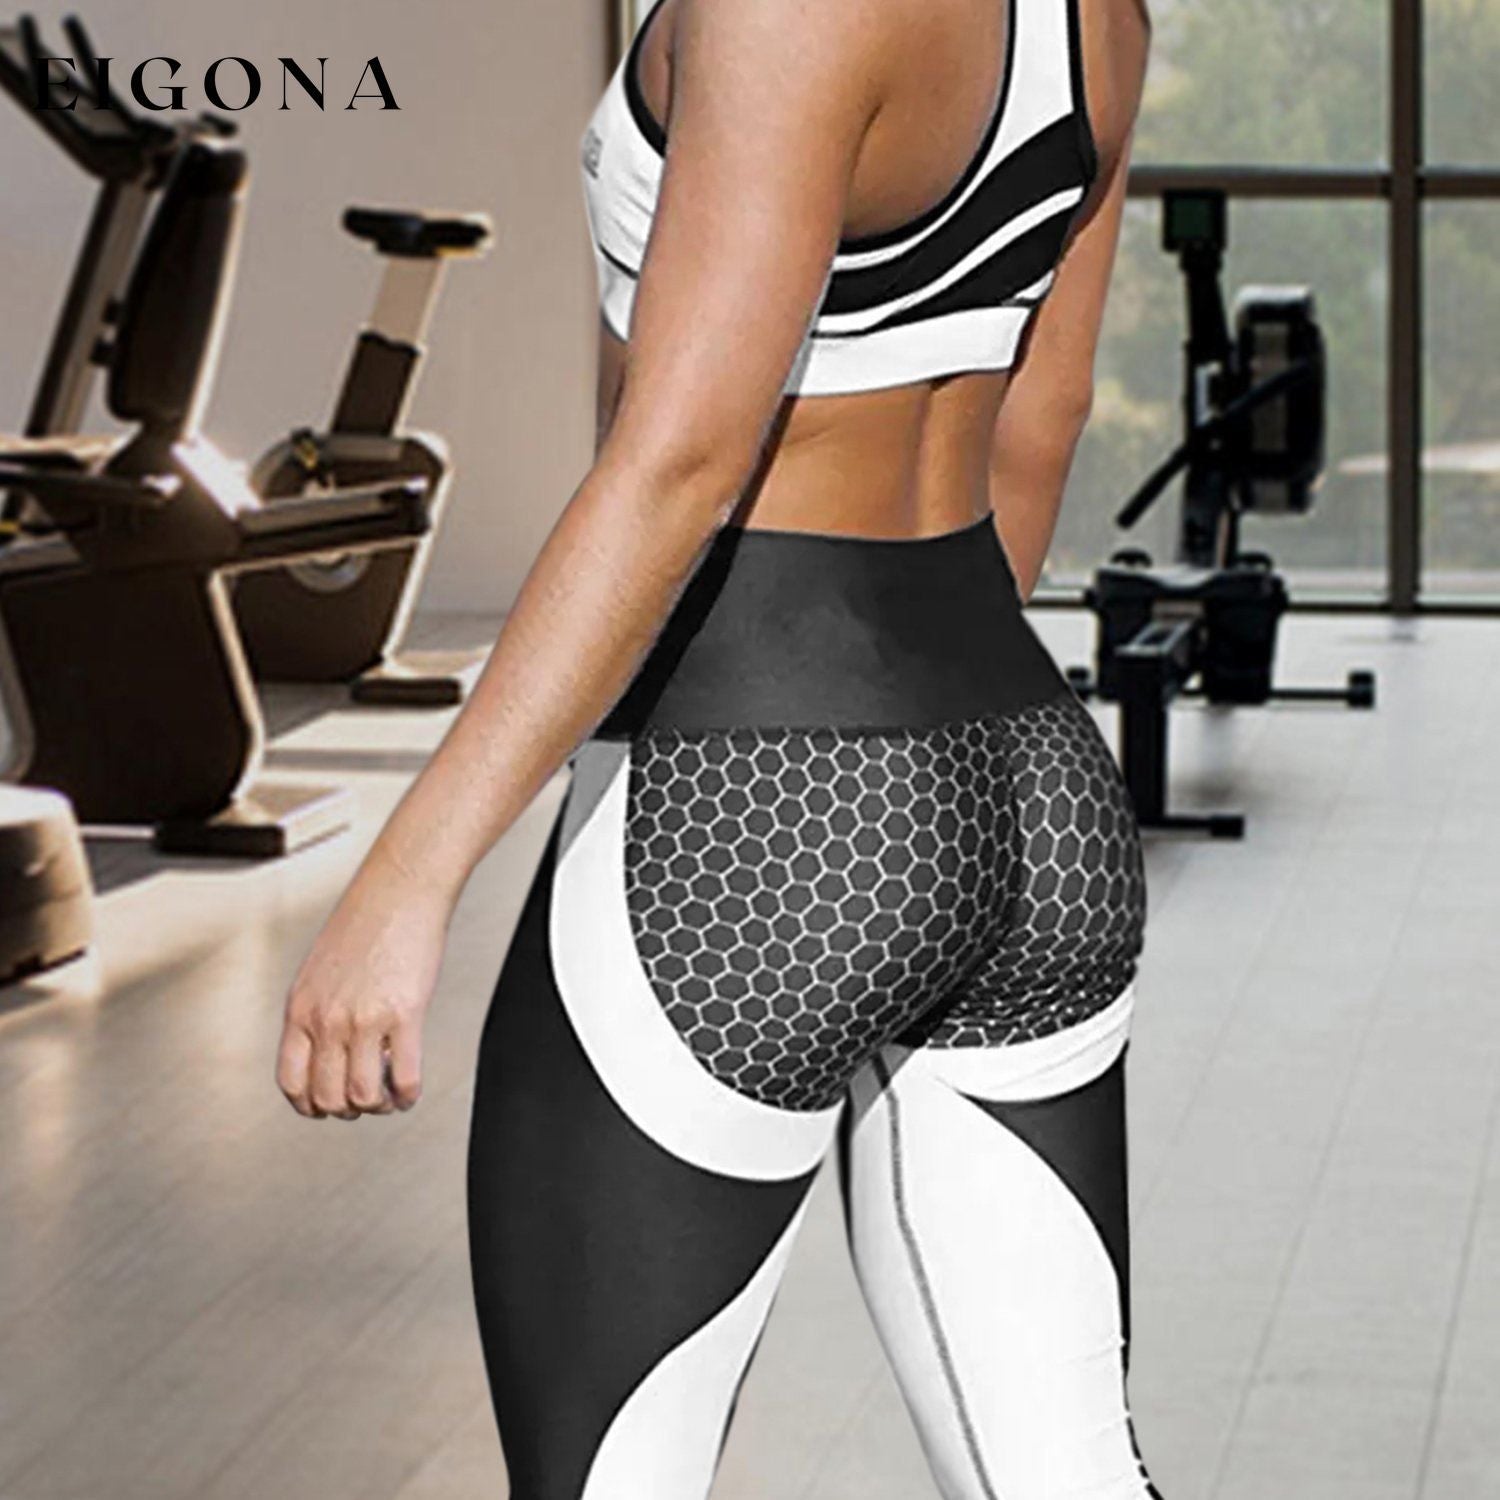 High-Waisted Honeycomb Design Ruched Workouts Fitness Yoga Gym Leggings Pants __stock:100 bottoms Low stock refund_fee:800